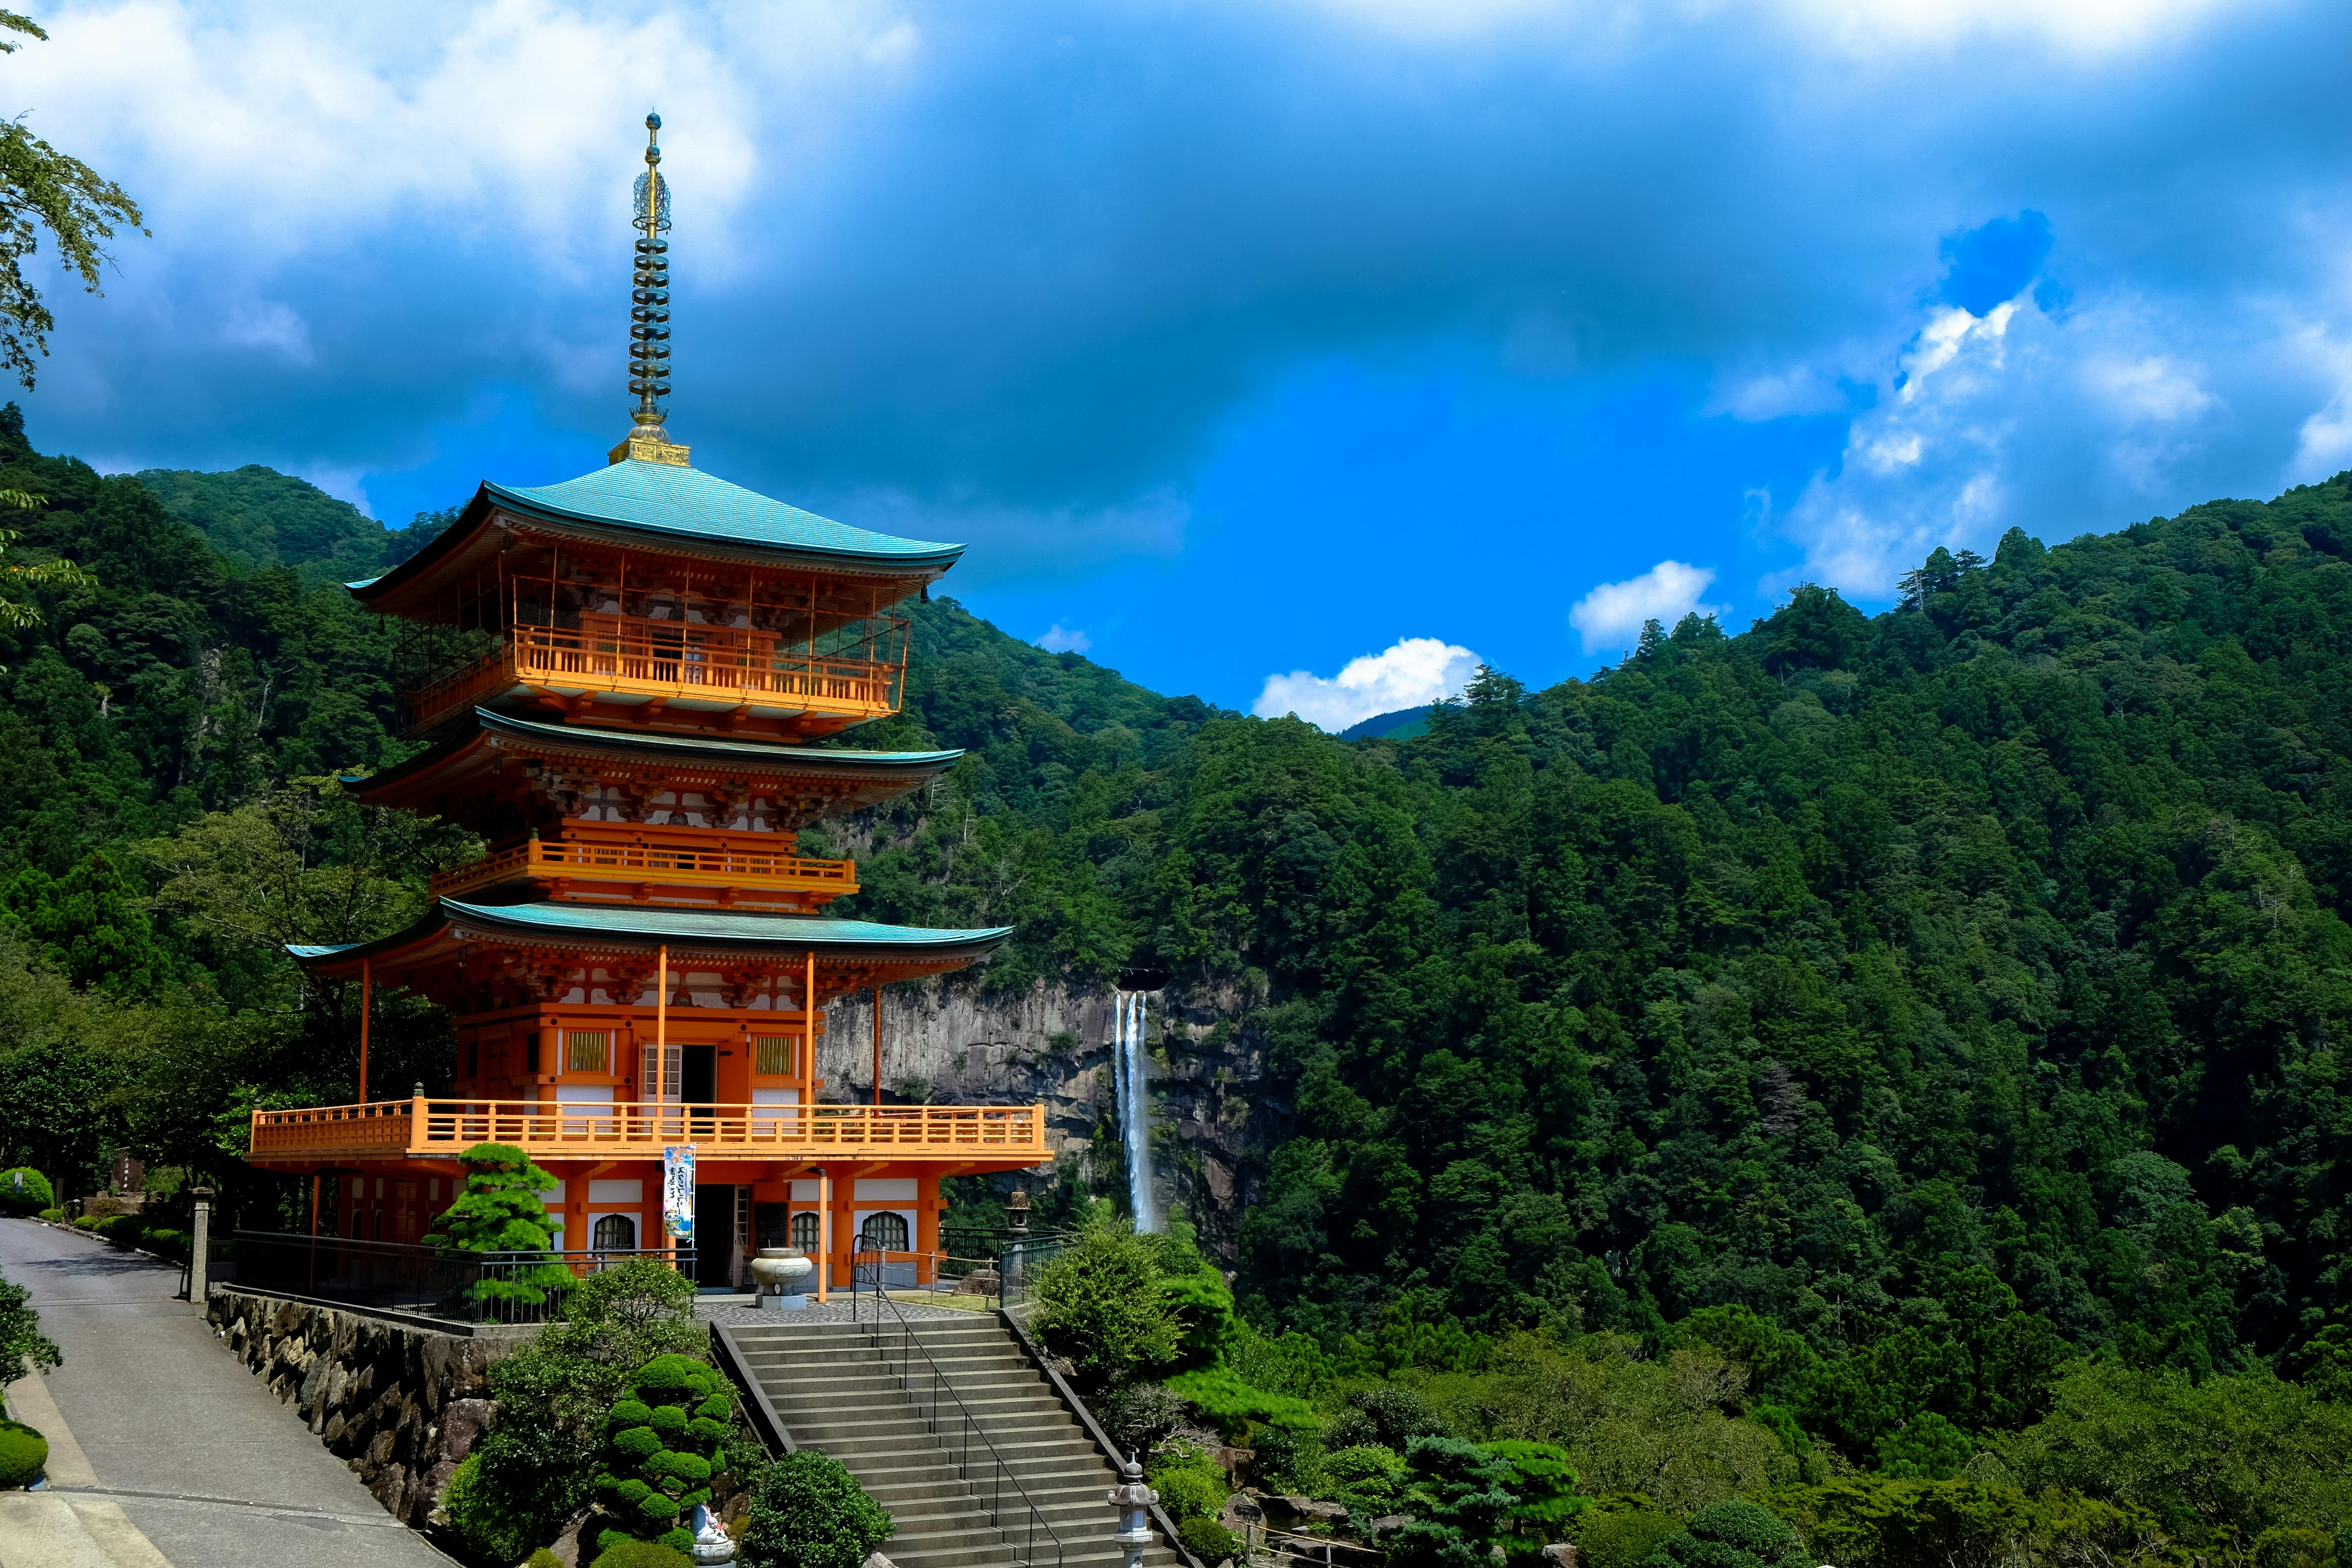 Download Pagoda wallpapers for mobile phone free Pagoda HD pictures